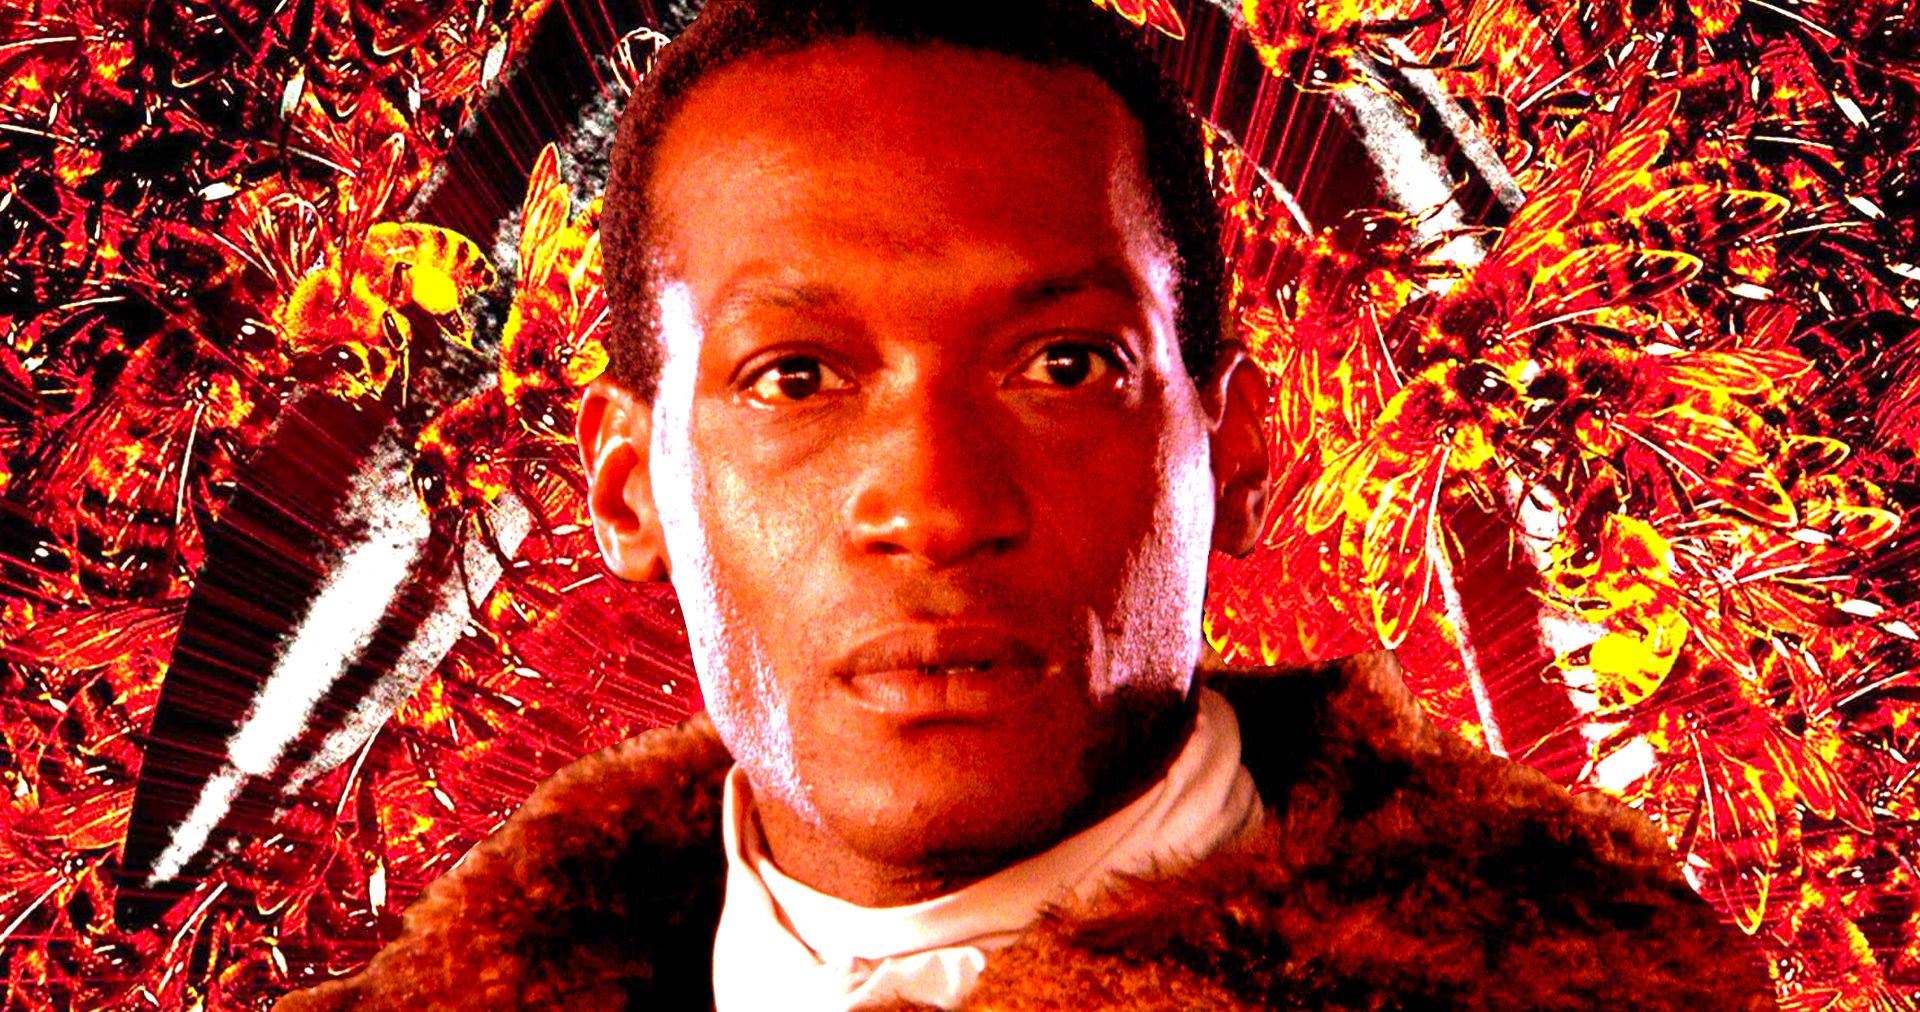 Candyman Icon Tony Todd On 'Fantastic' Way The Franchise Has Evolved